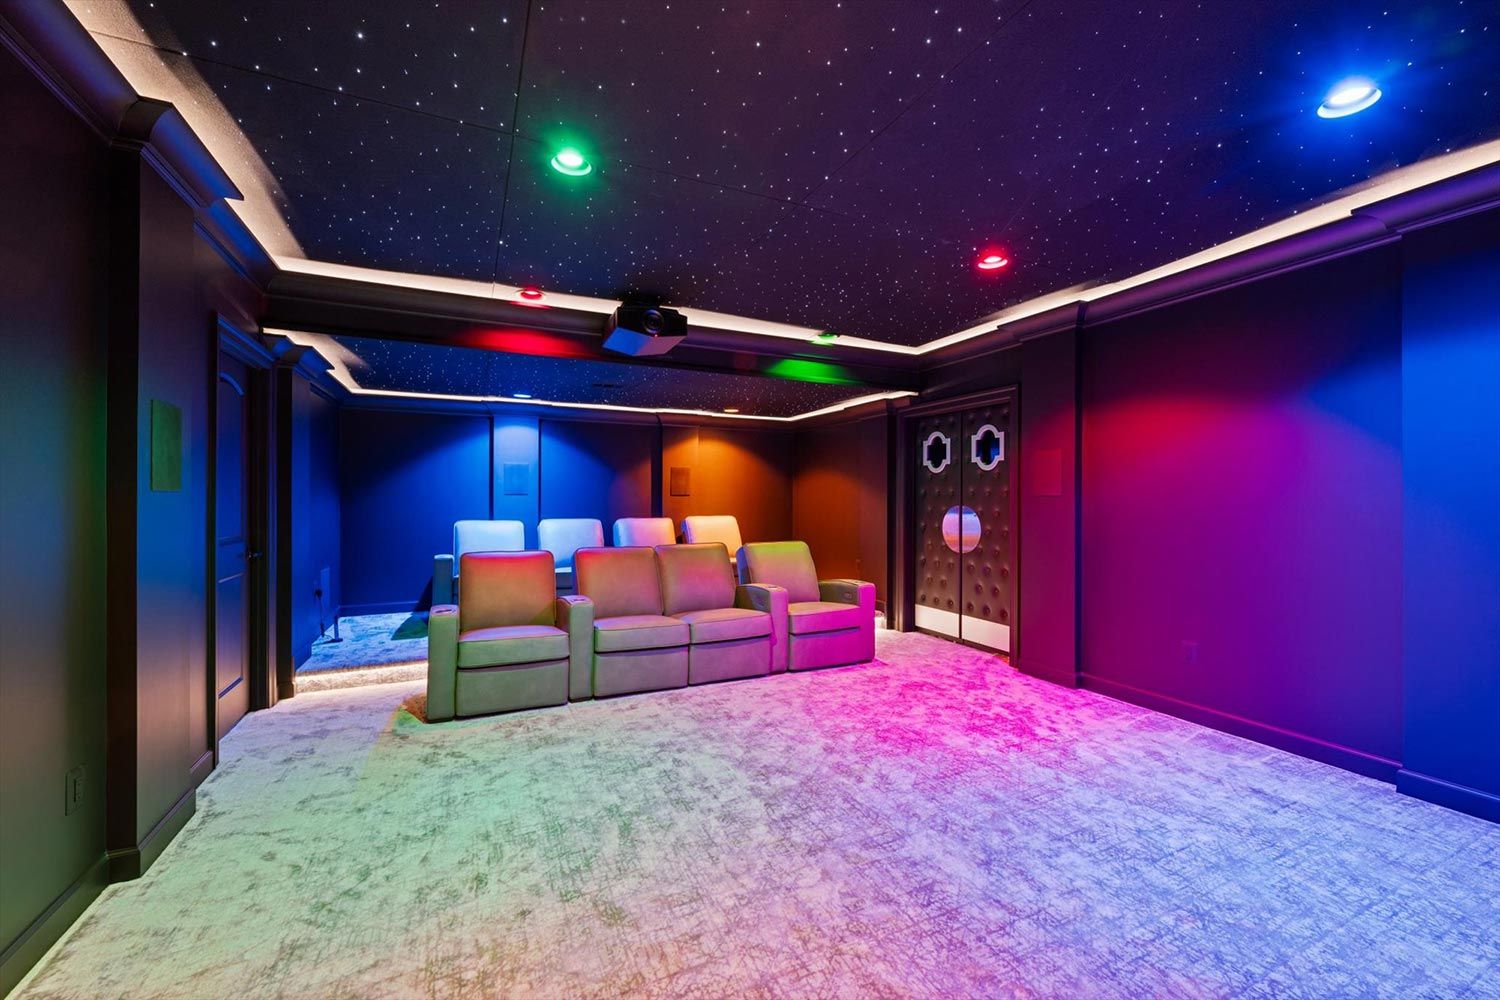 Vibrant home theater room featuring colorful ambient lighting and a starry ceiling, creating a dynamic and engaging viewing environment.